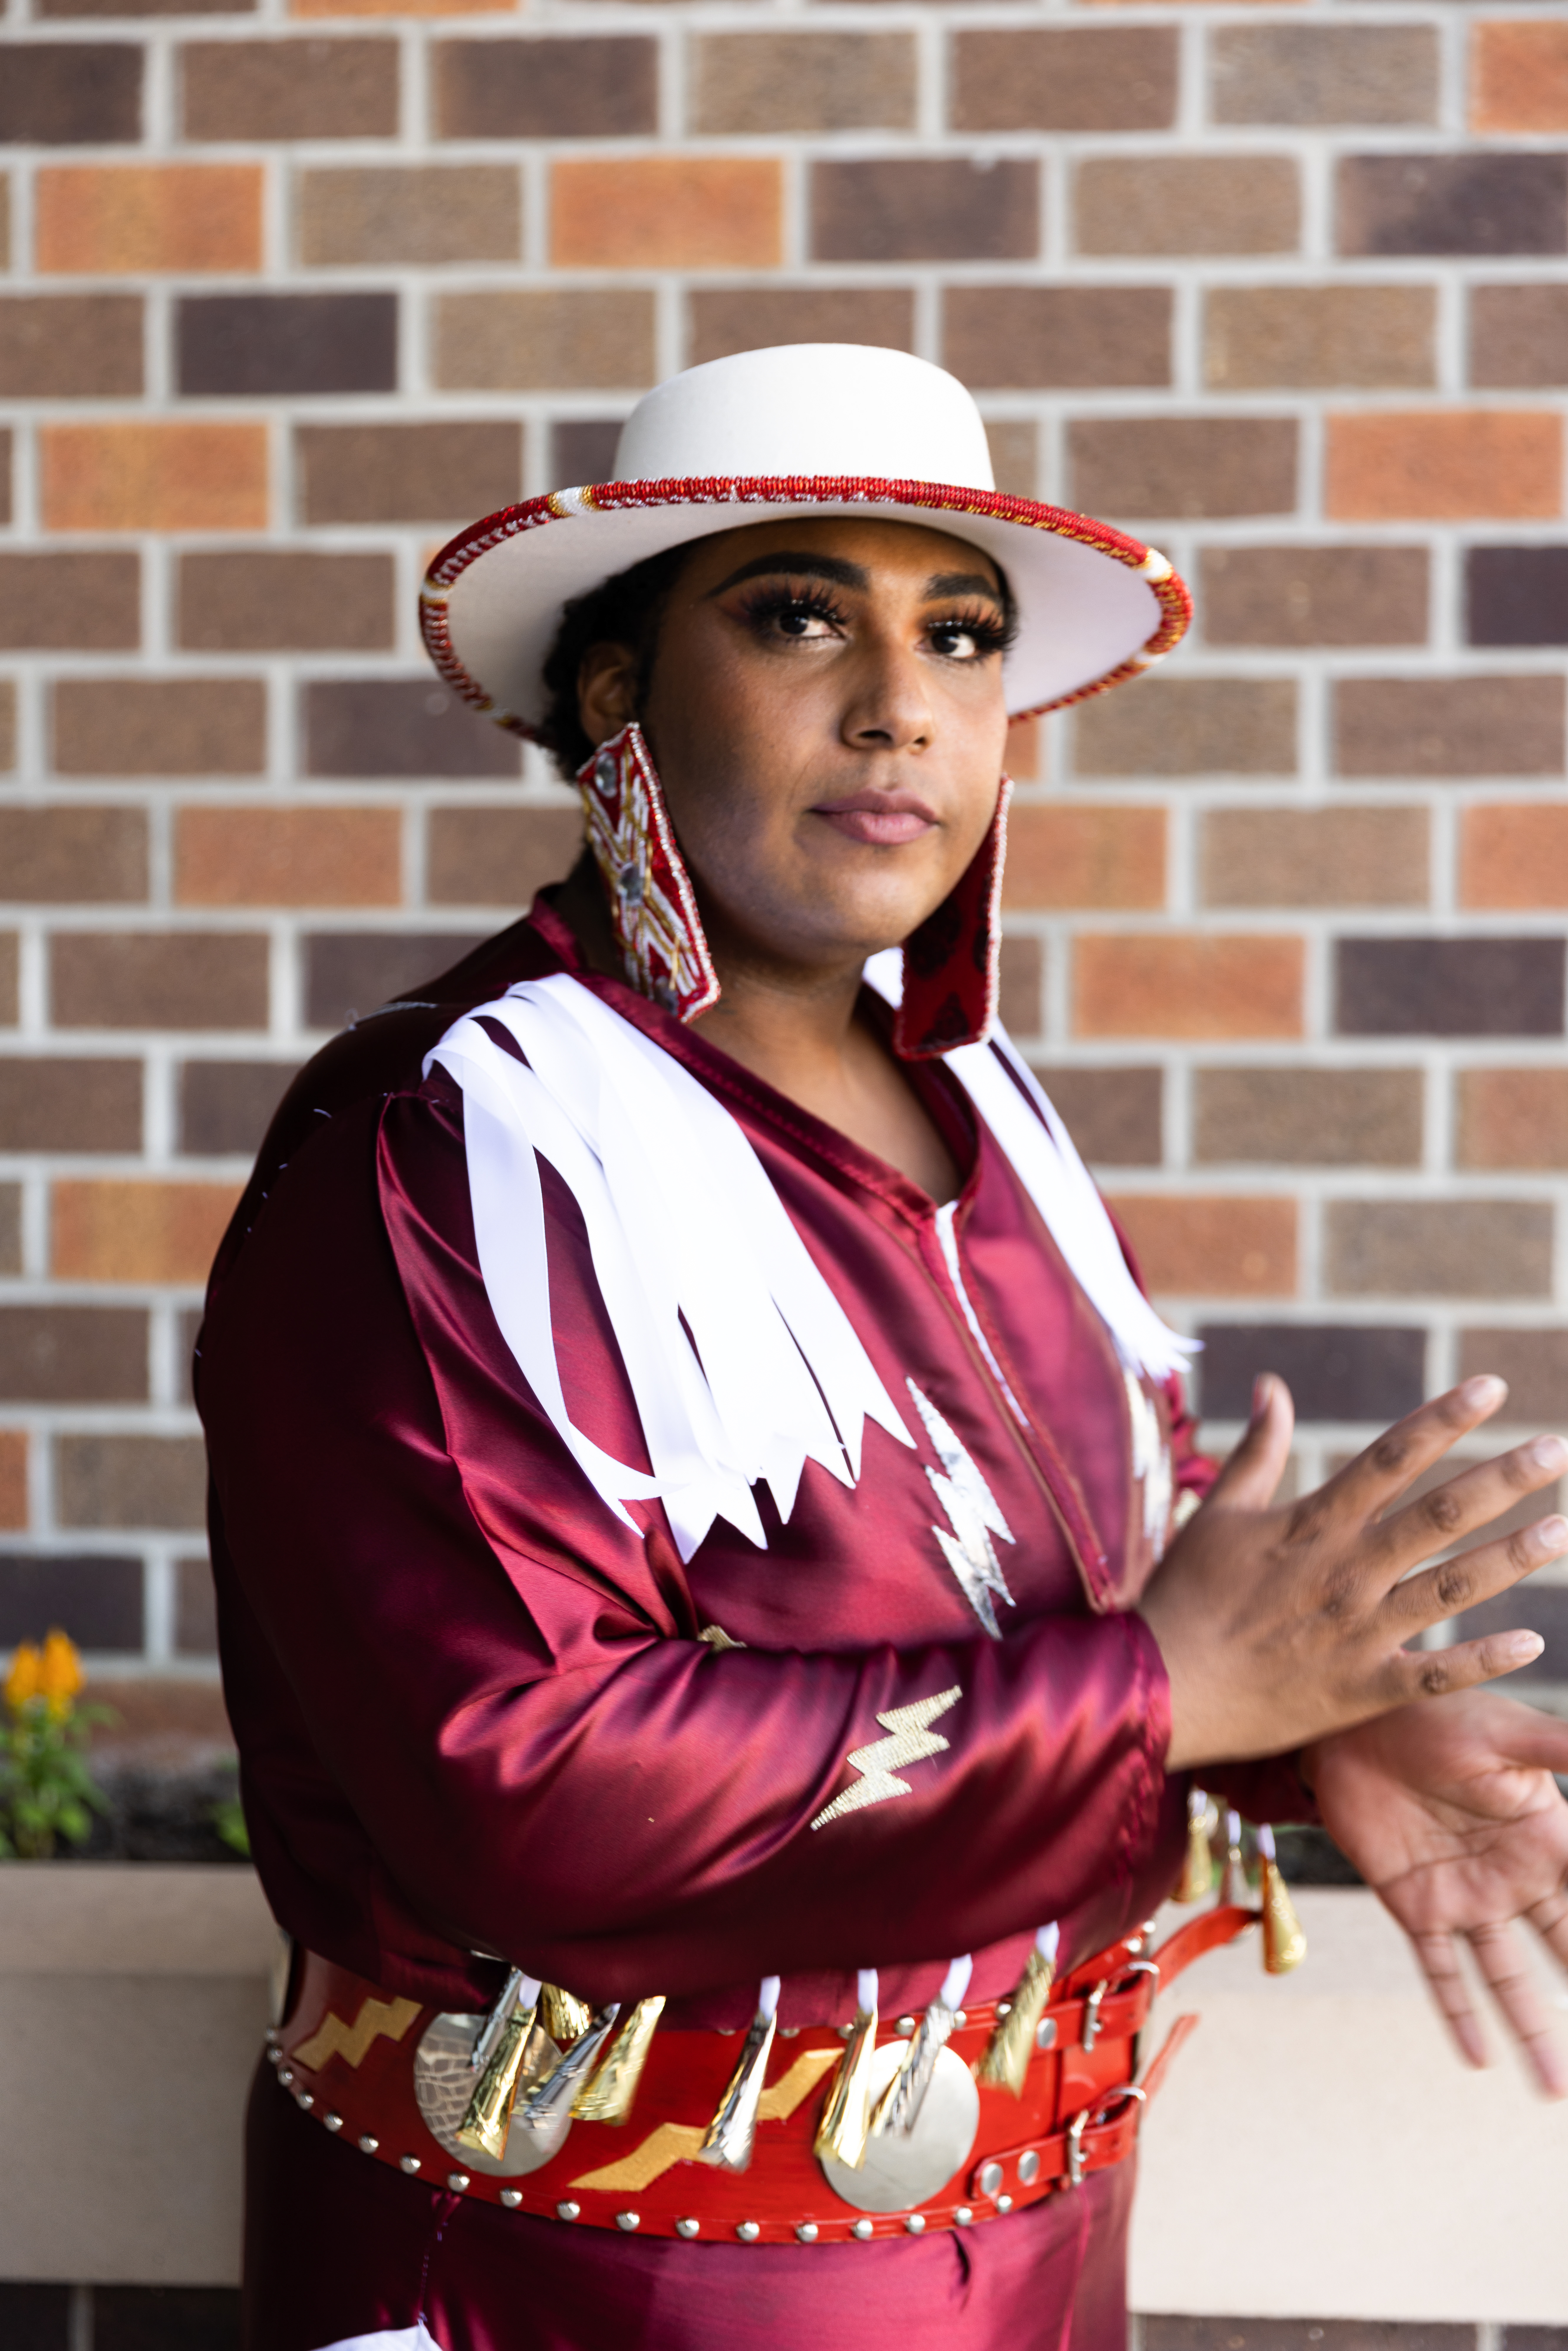 A person with medium-dark brown skin wearing large rectangular earrings, a white hat, and a red jacket with white fringe, looking at the camera.